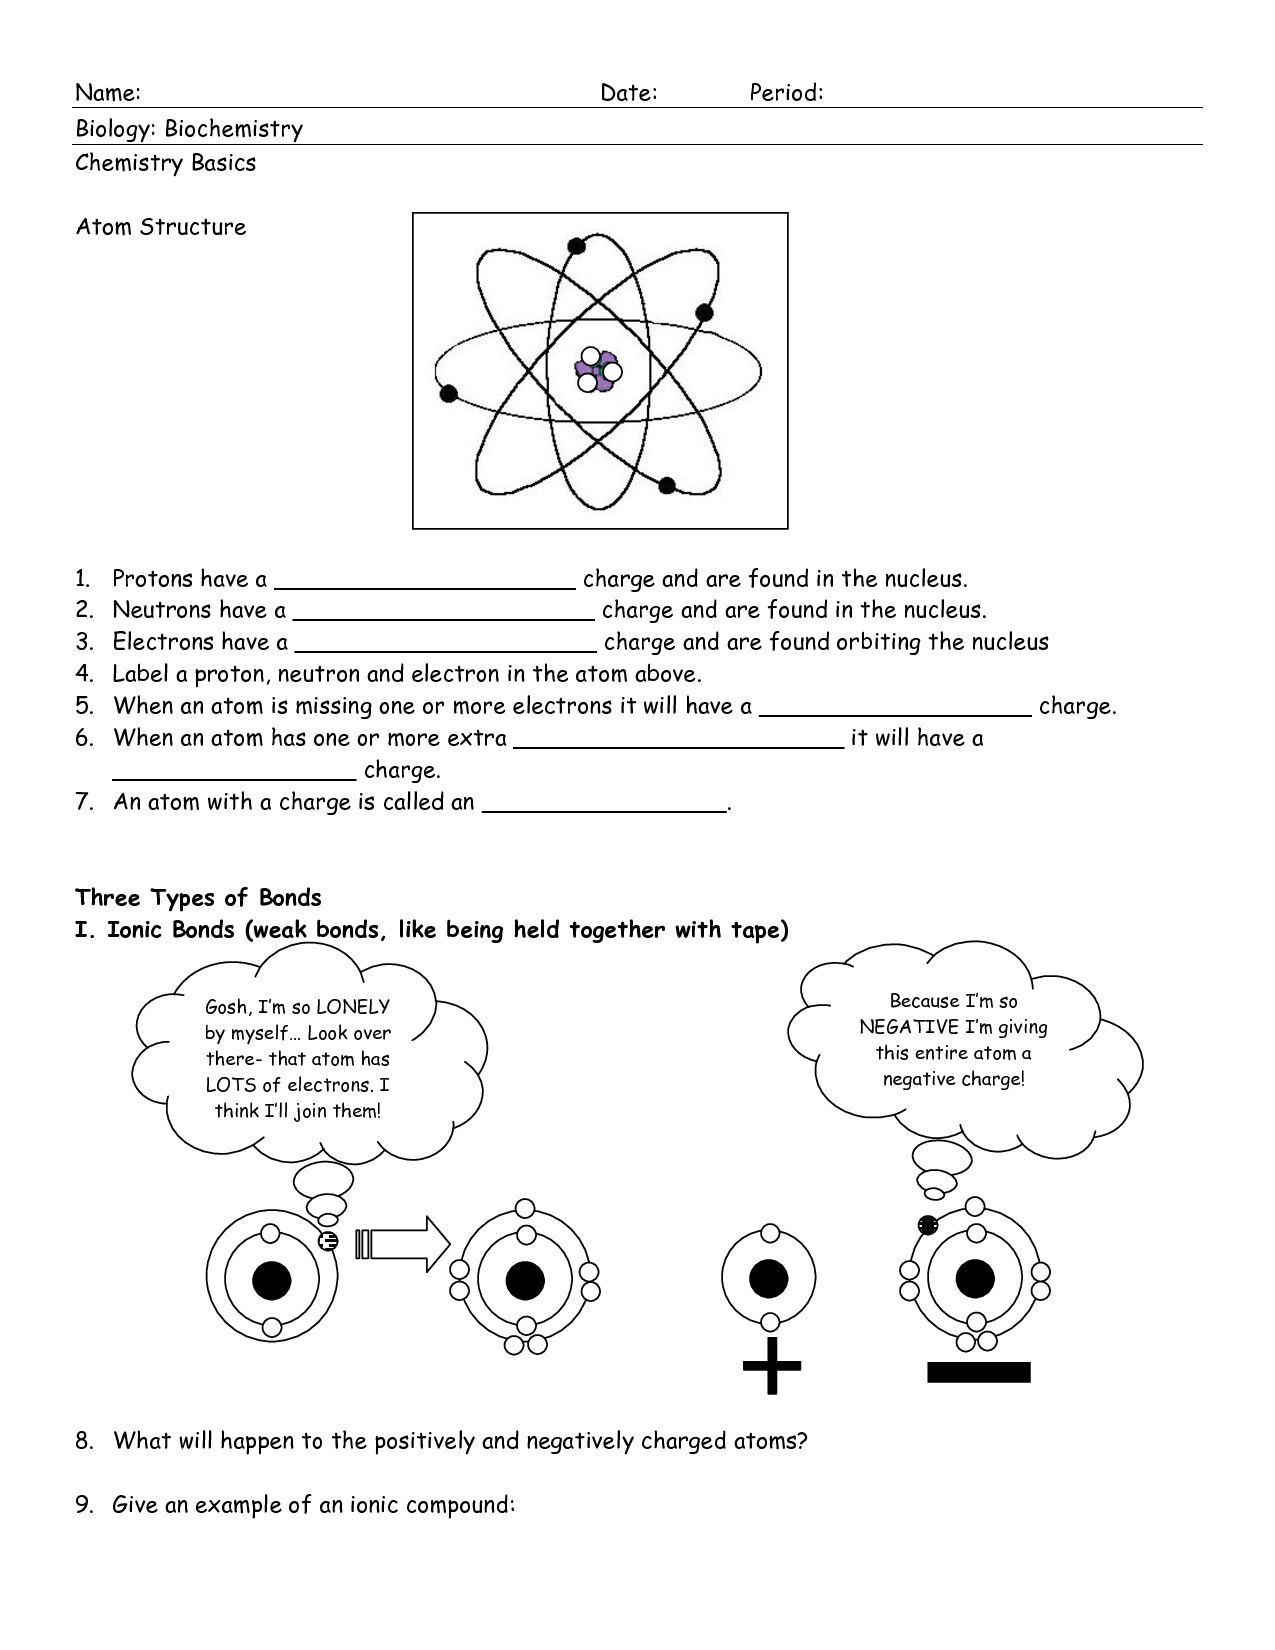 lewis structure worksheet and key